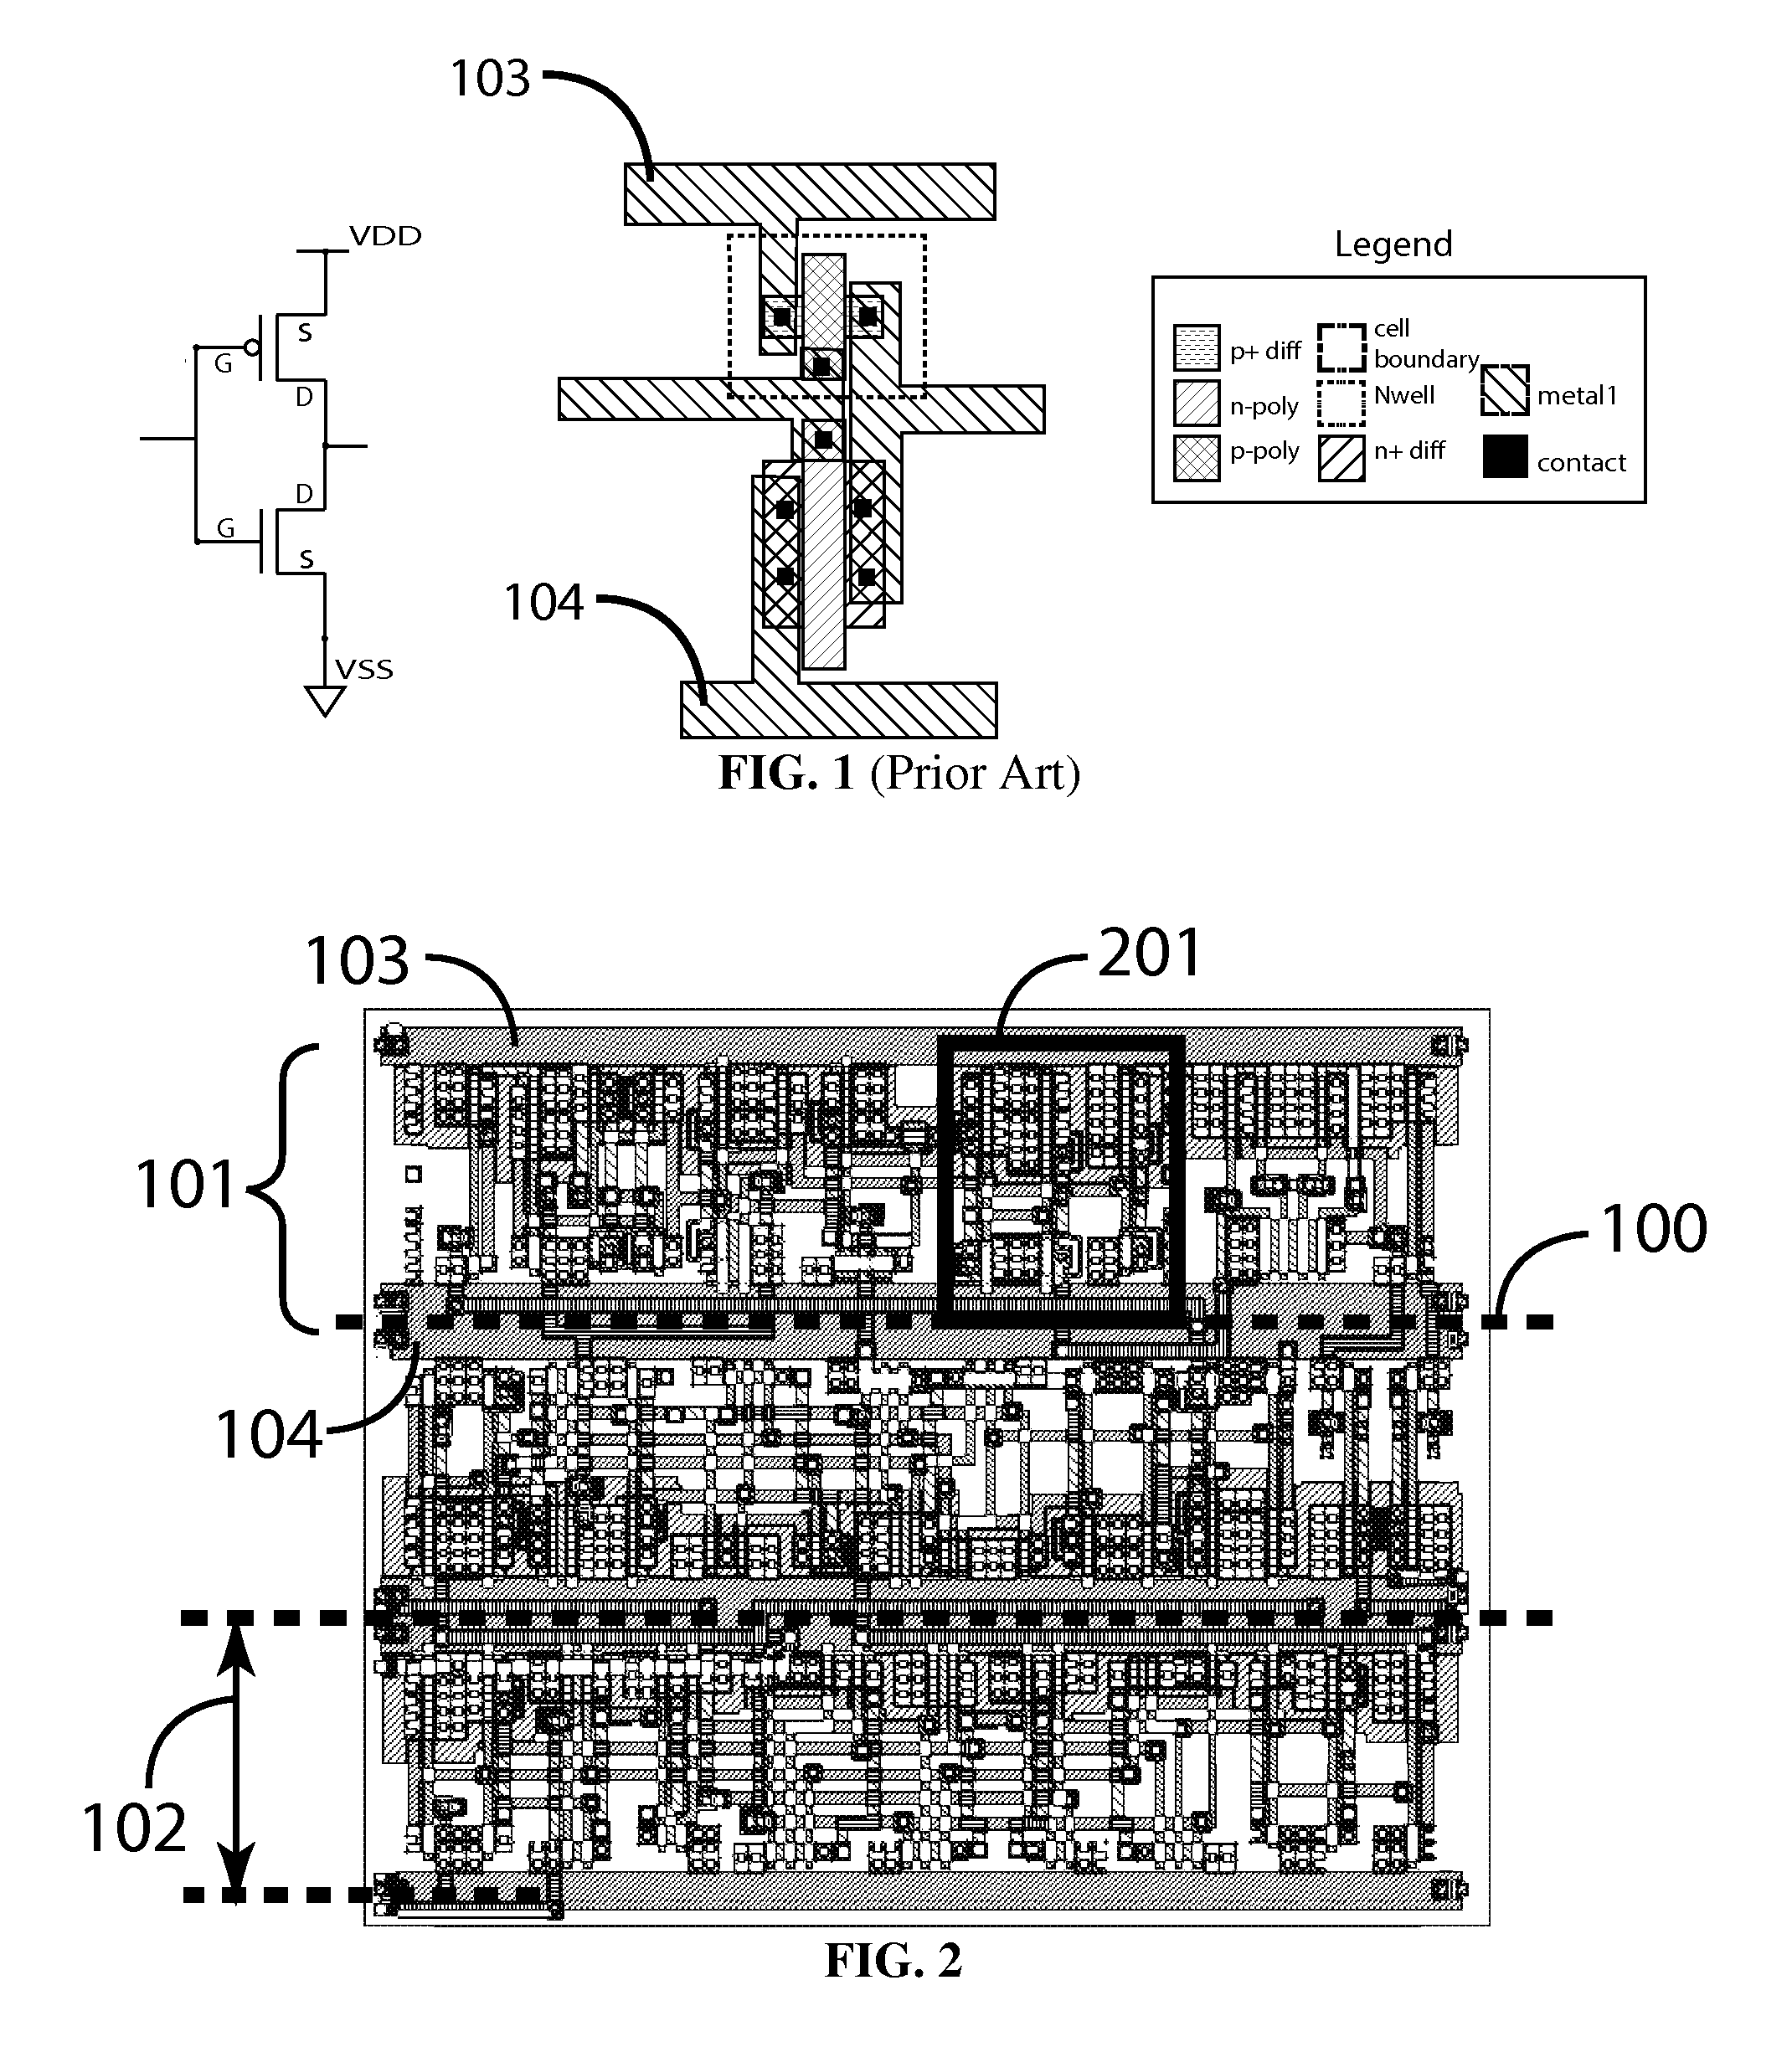 Row based analog standard cell layout design and methodology